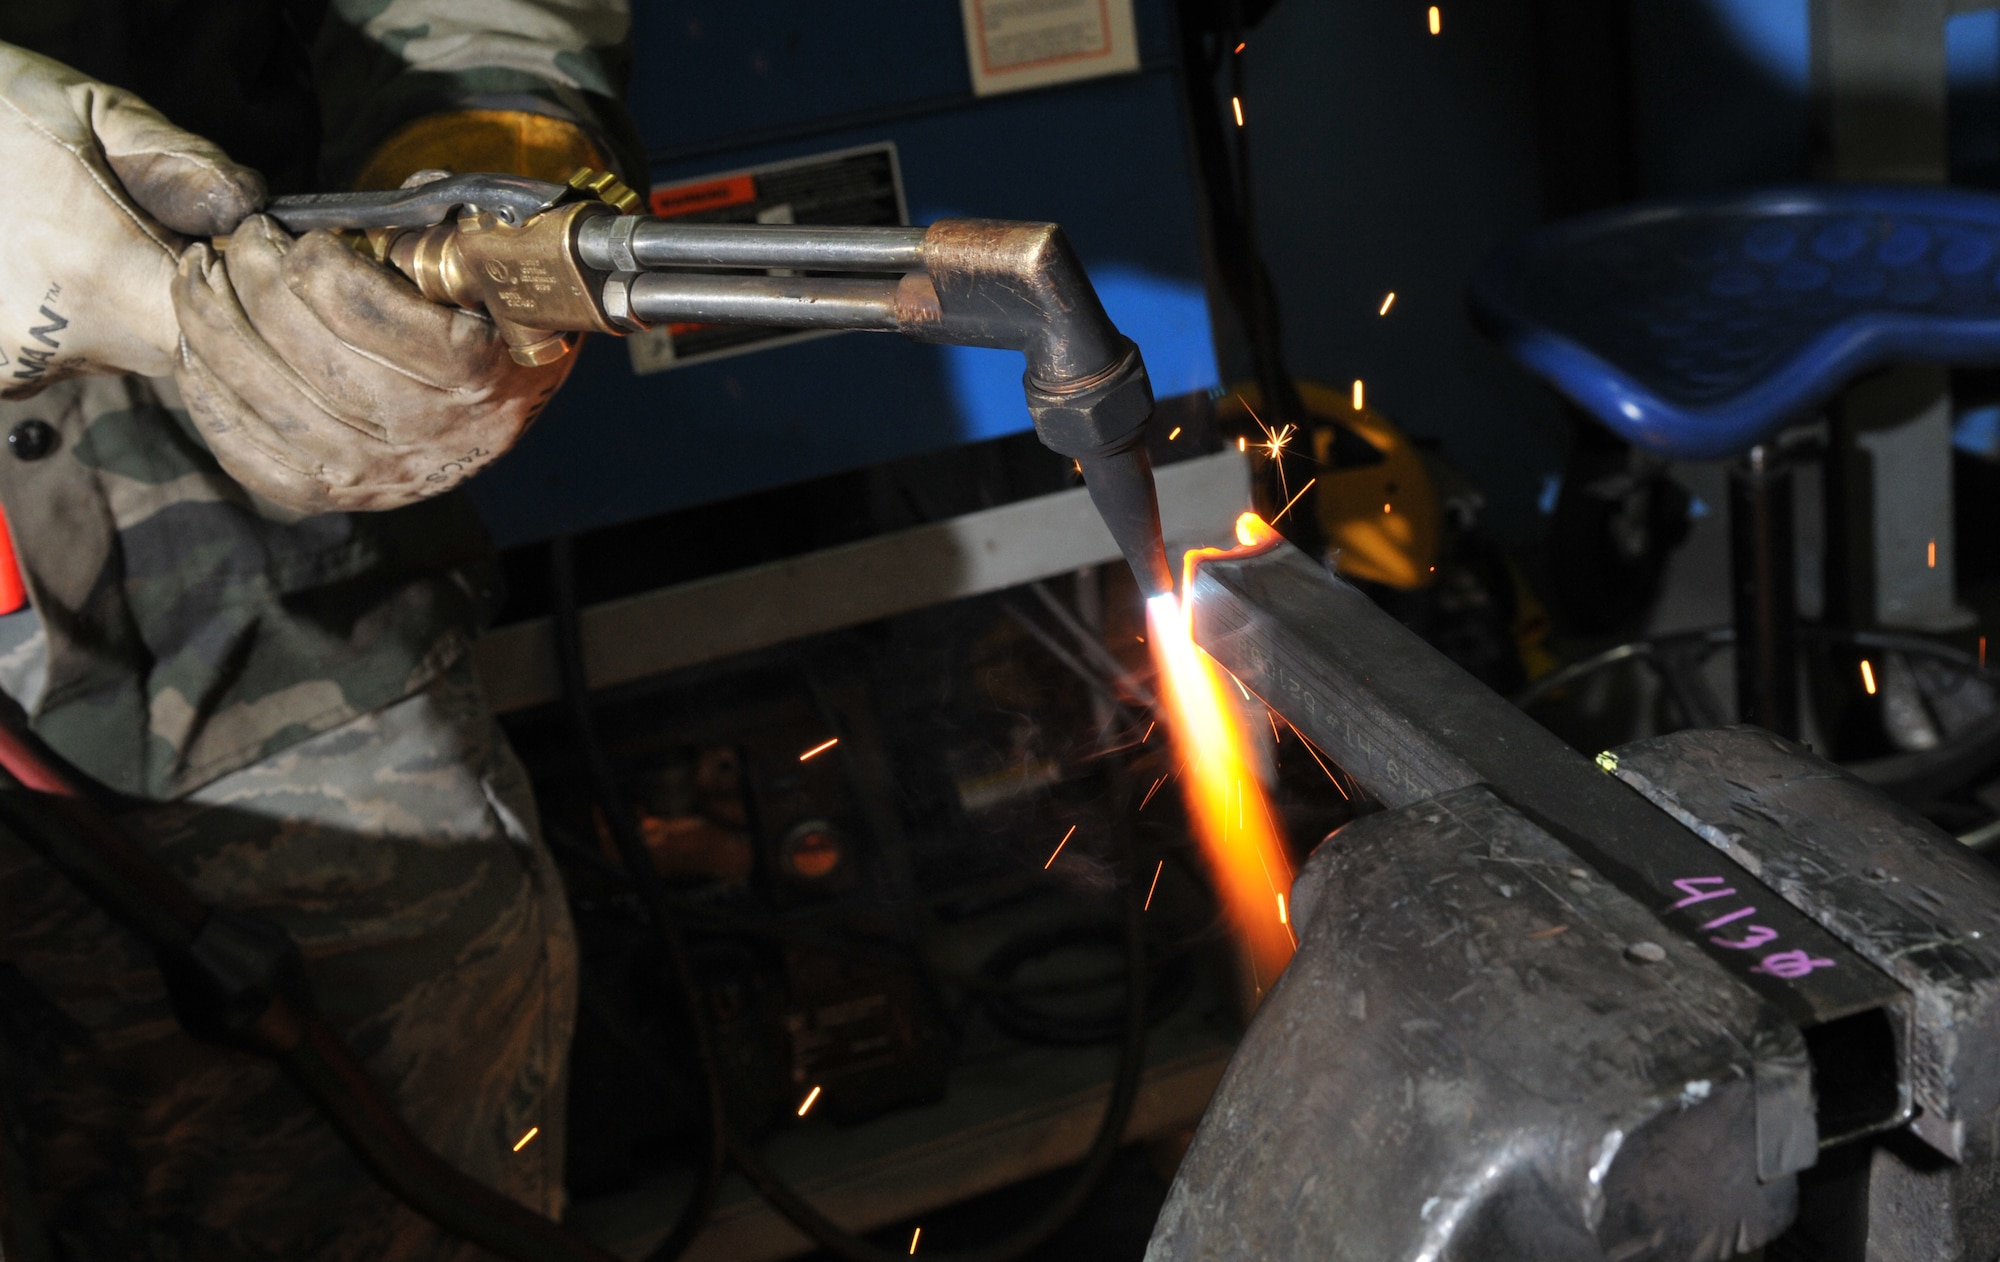 SPANGDAHLEM AIR BASE, Germany -- Senior Airman James Hurst, 52nd Equipment Maintenance Squadron, cuts metal with an oxyacetylene rig Jan. 22 in the metals technology welding room. This process is necessary to cut metal to a size small enough for disposal. (U.S. Air Force photo/Airman 1st Class Nick Wilson)